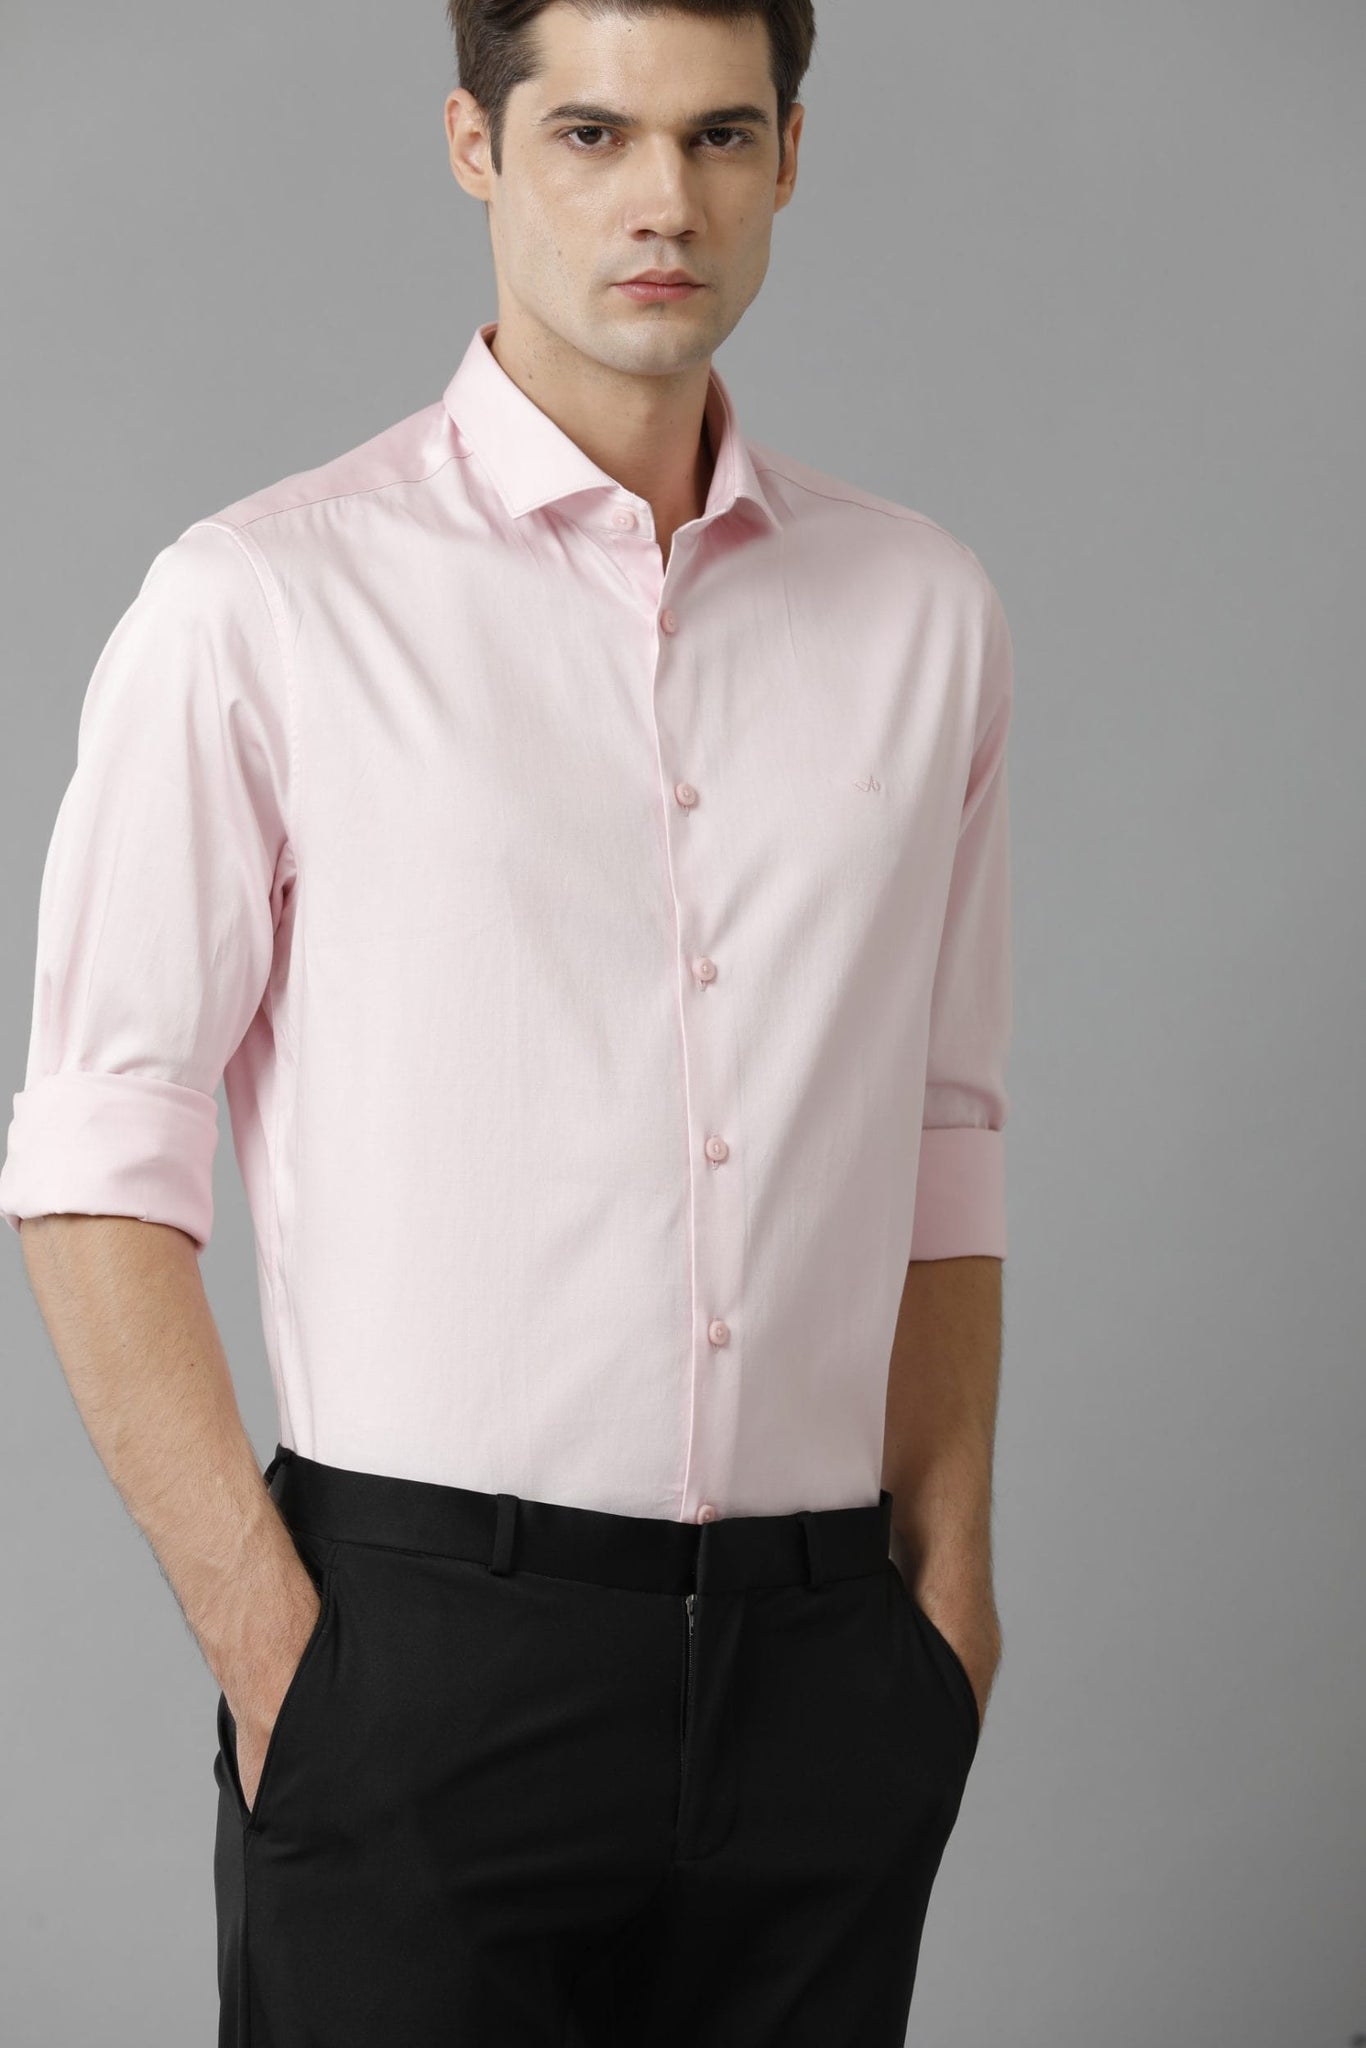 Solid Formal Satin Stretch Cotton Pink Shirt